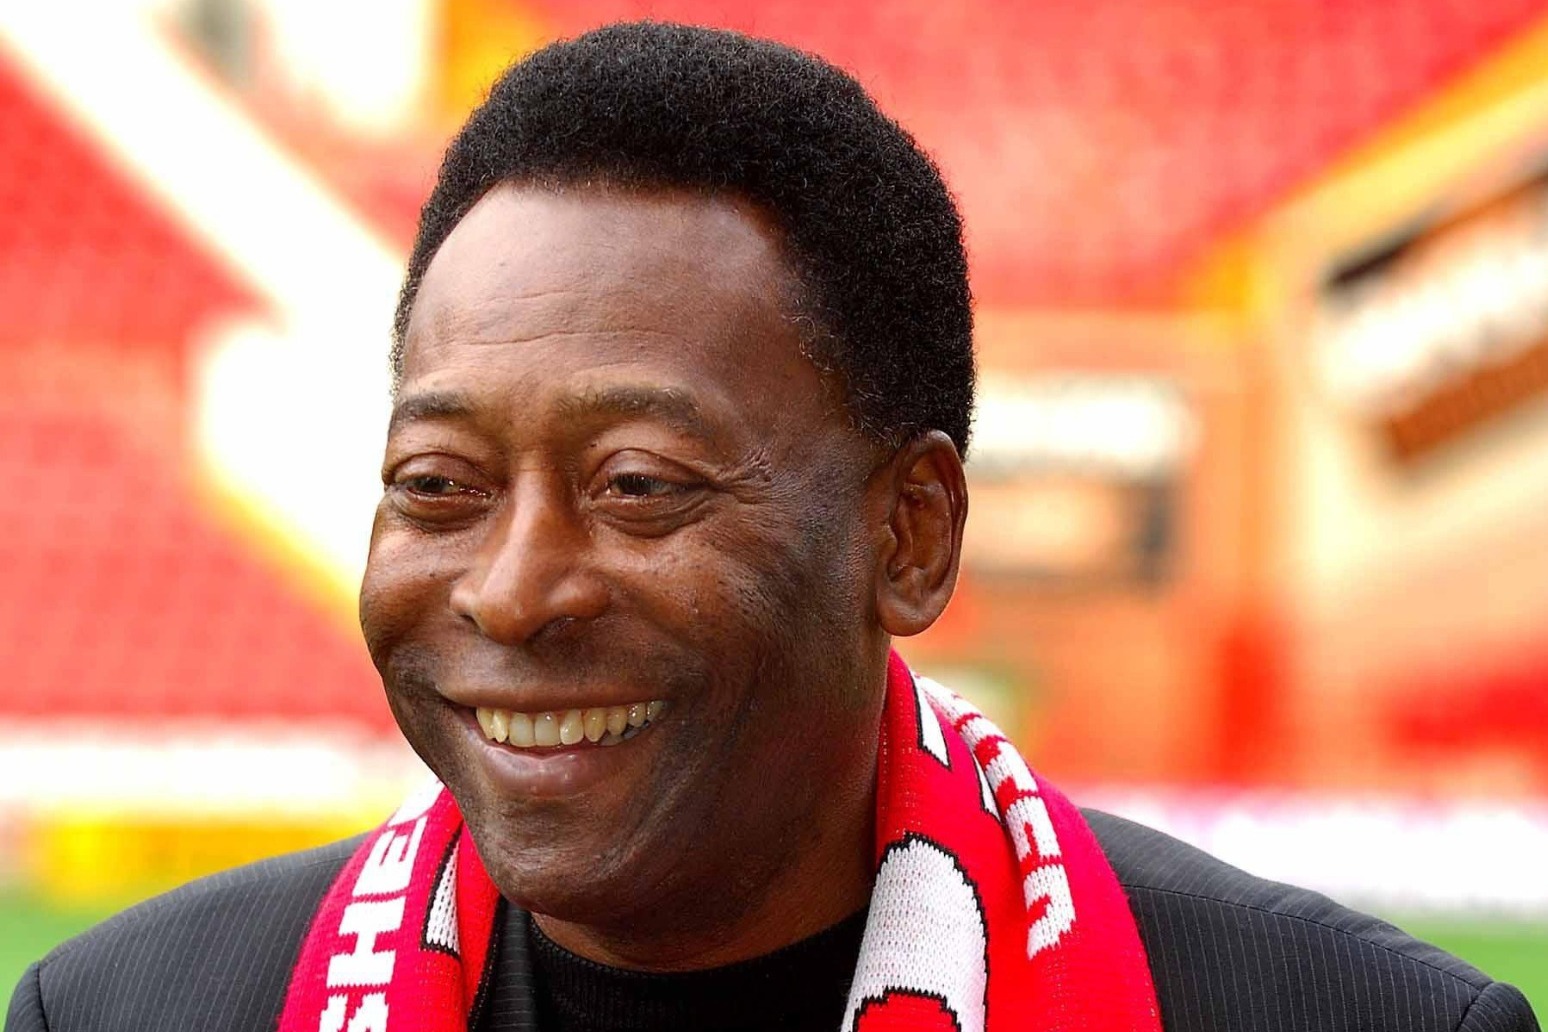 Pele to be buried today after lying in state at Urbano Caldeira stadium 